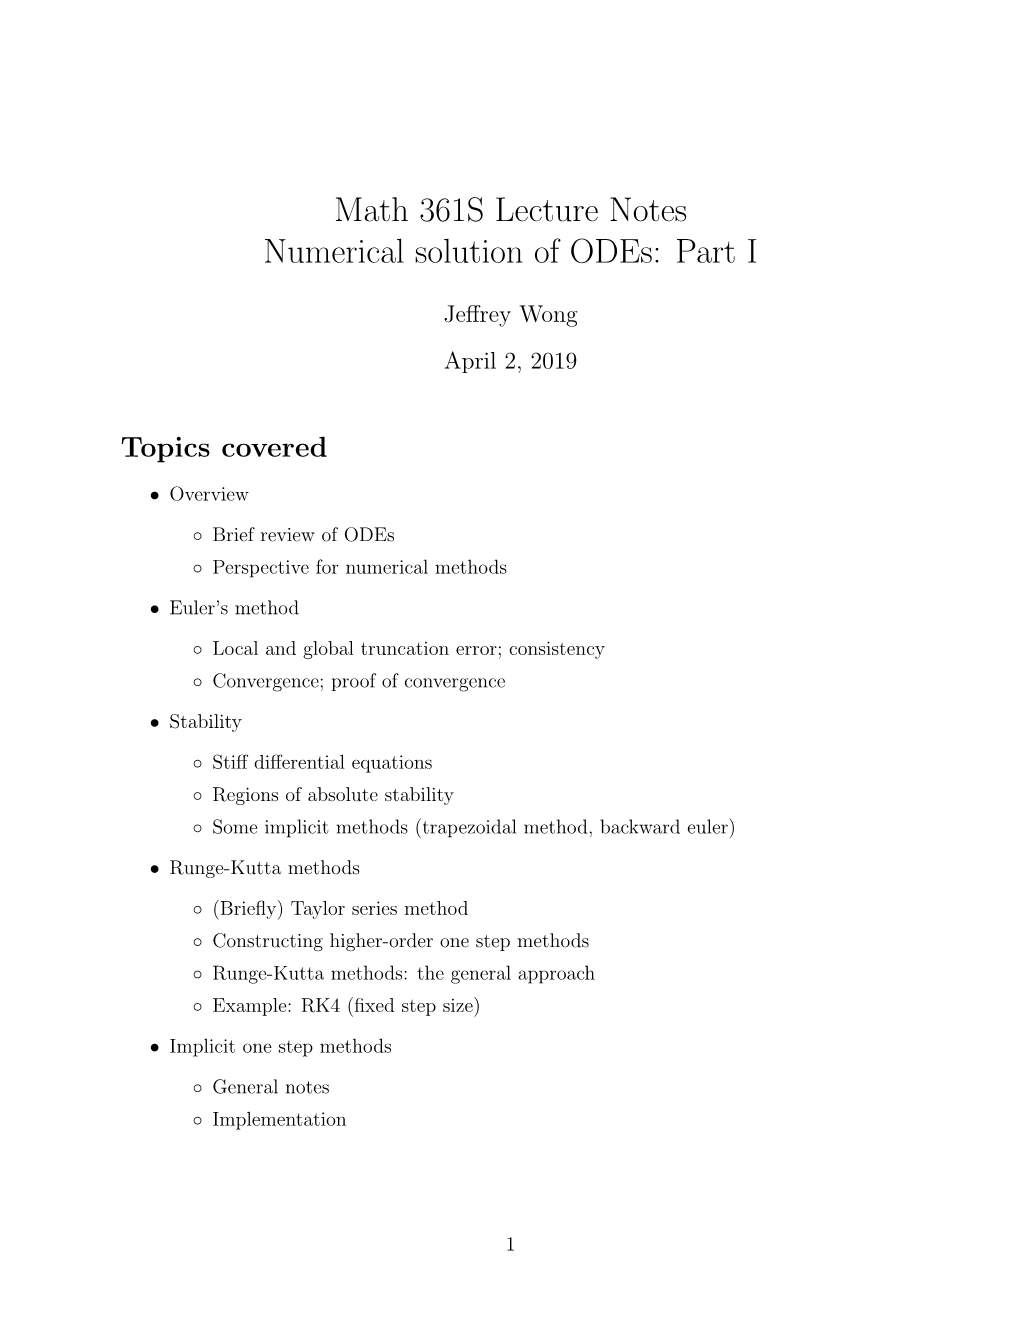 Math 361S Lecture Notes Numerical Solution of Odes: Part I